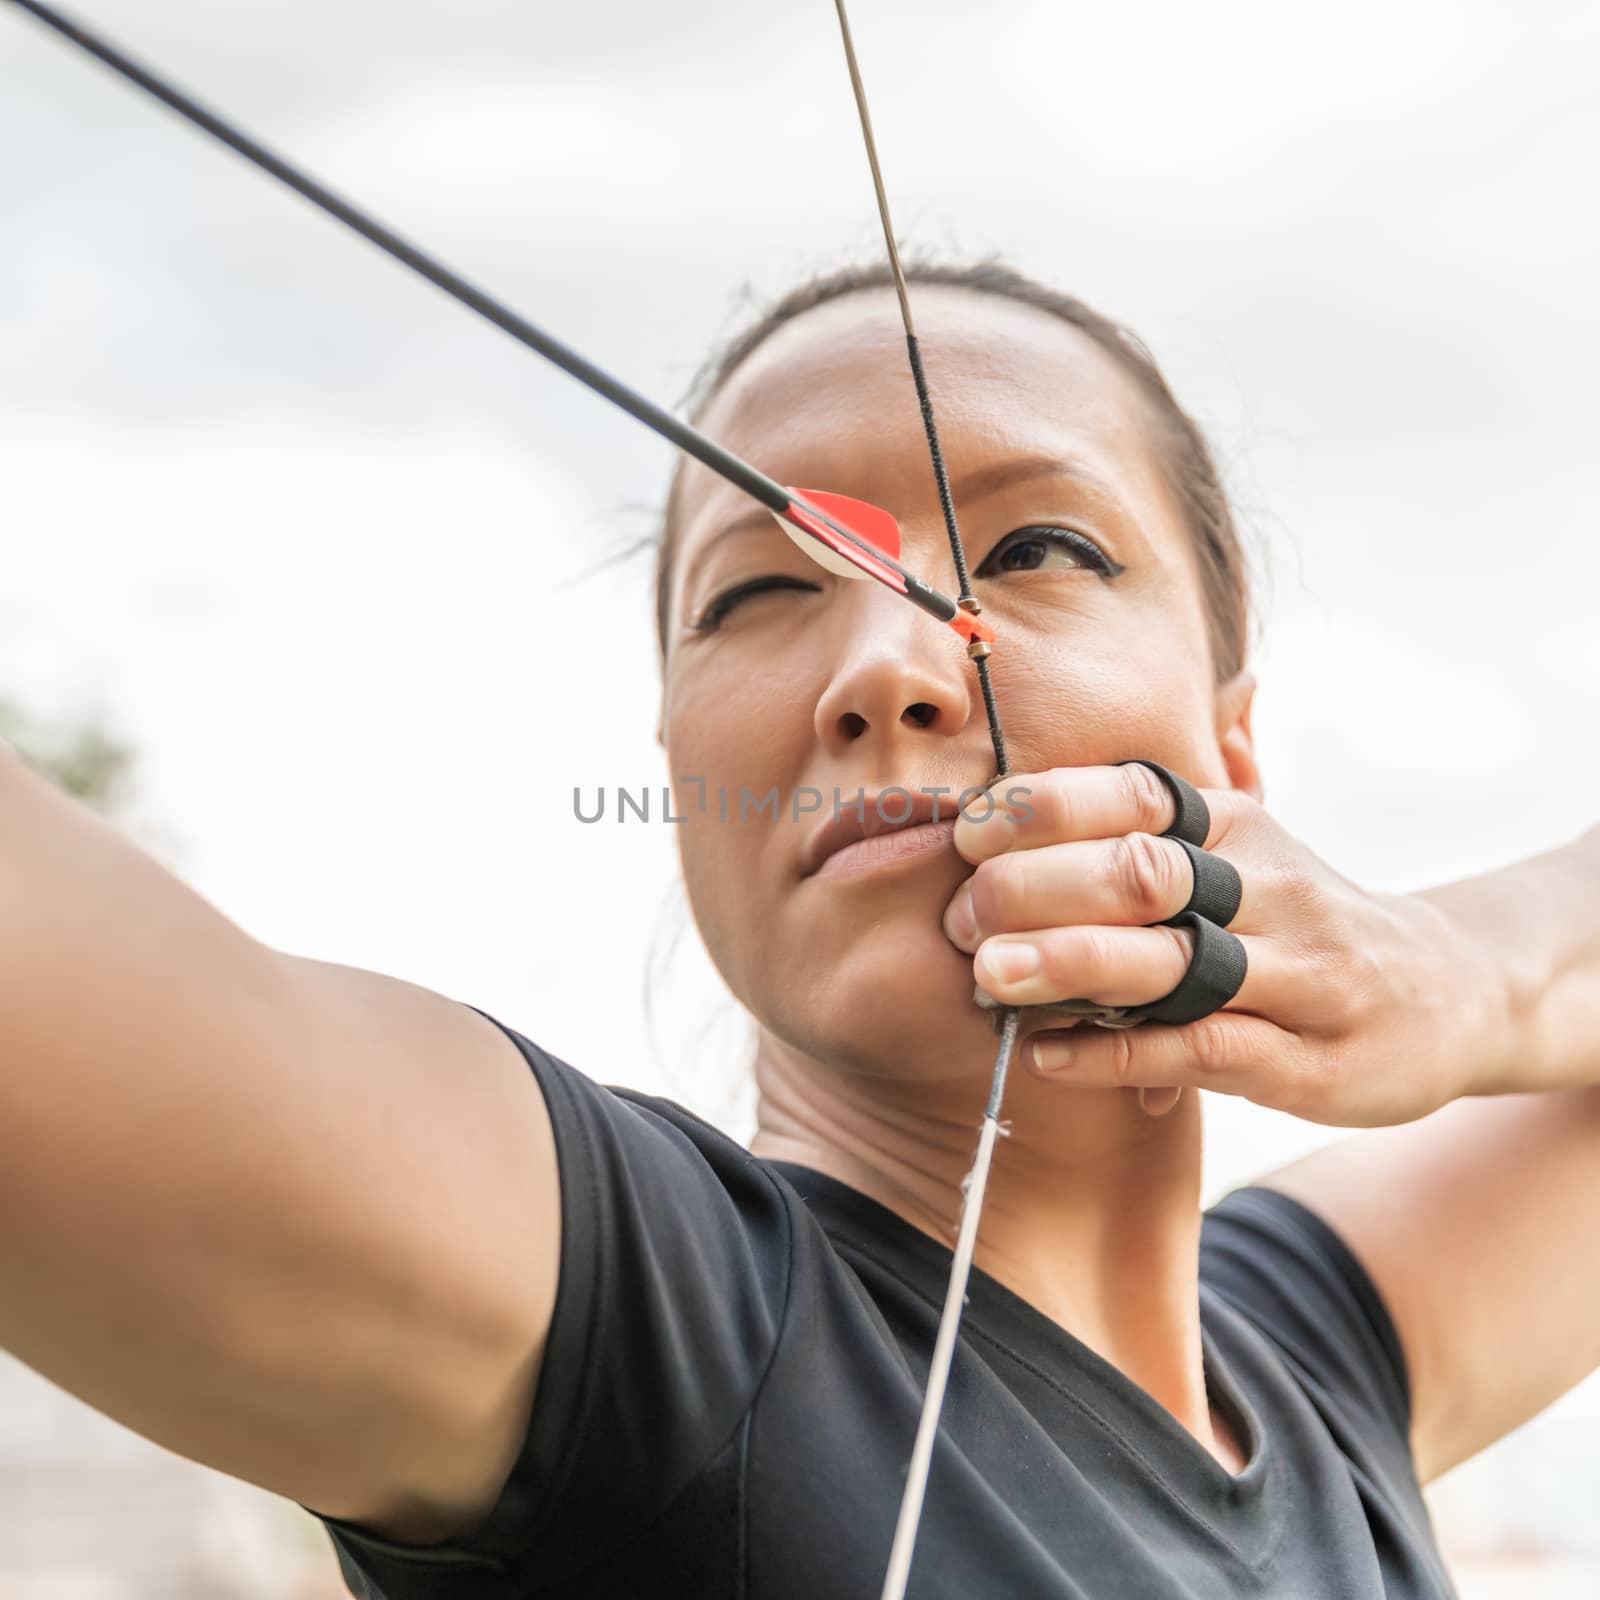 attractive woman on archery, focuses eye target for arrow from bow by Edophoto